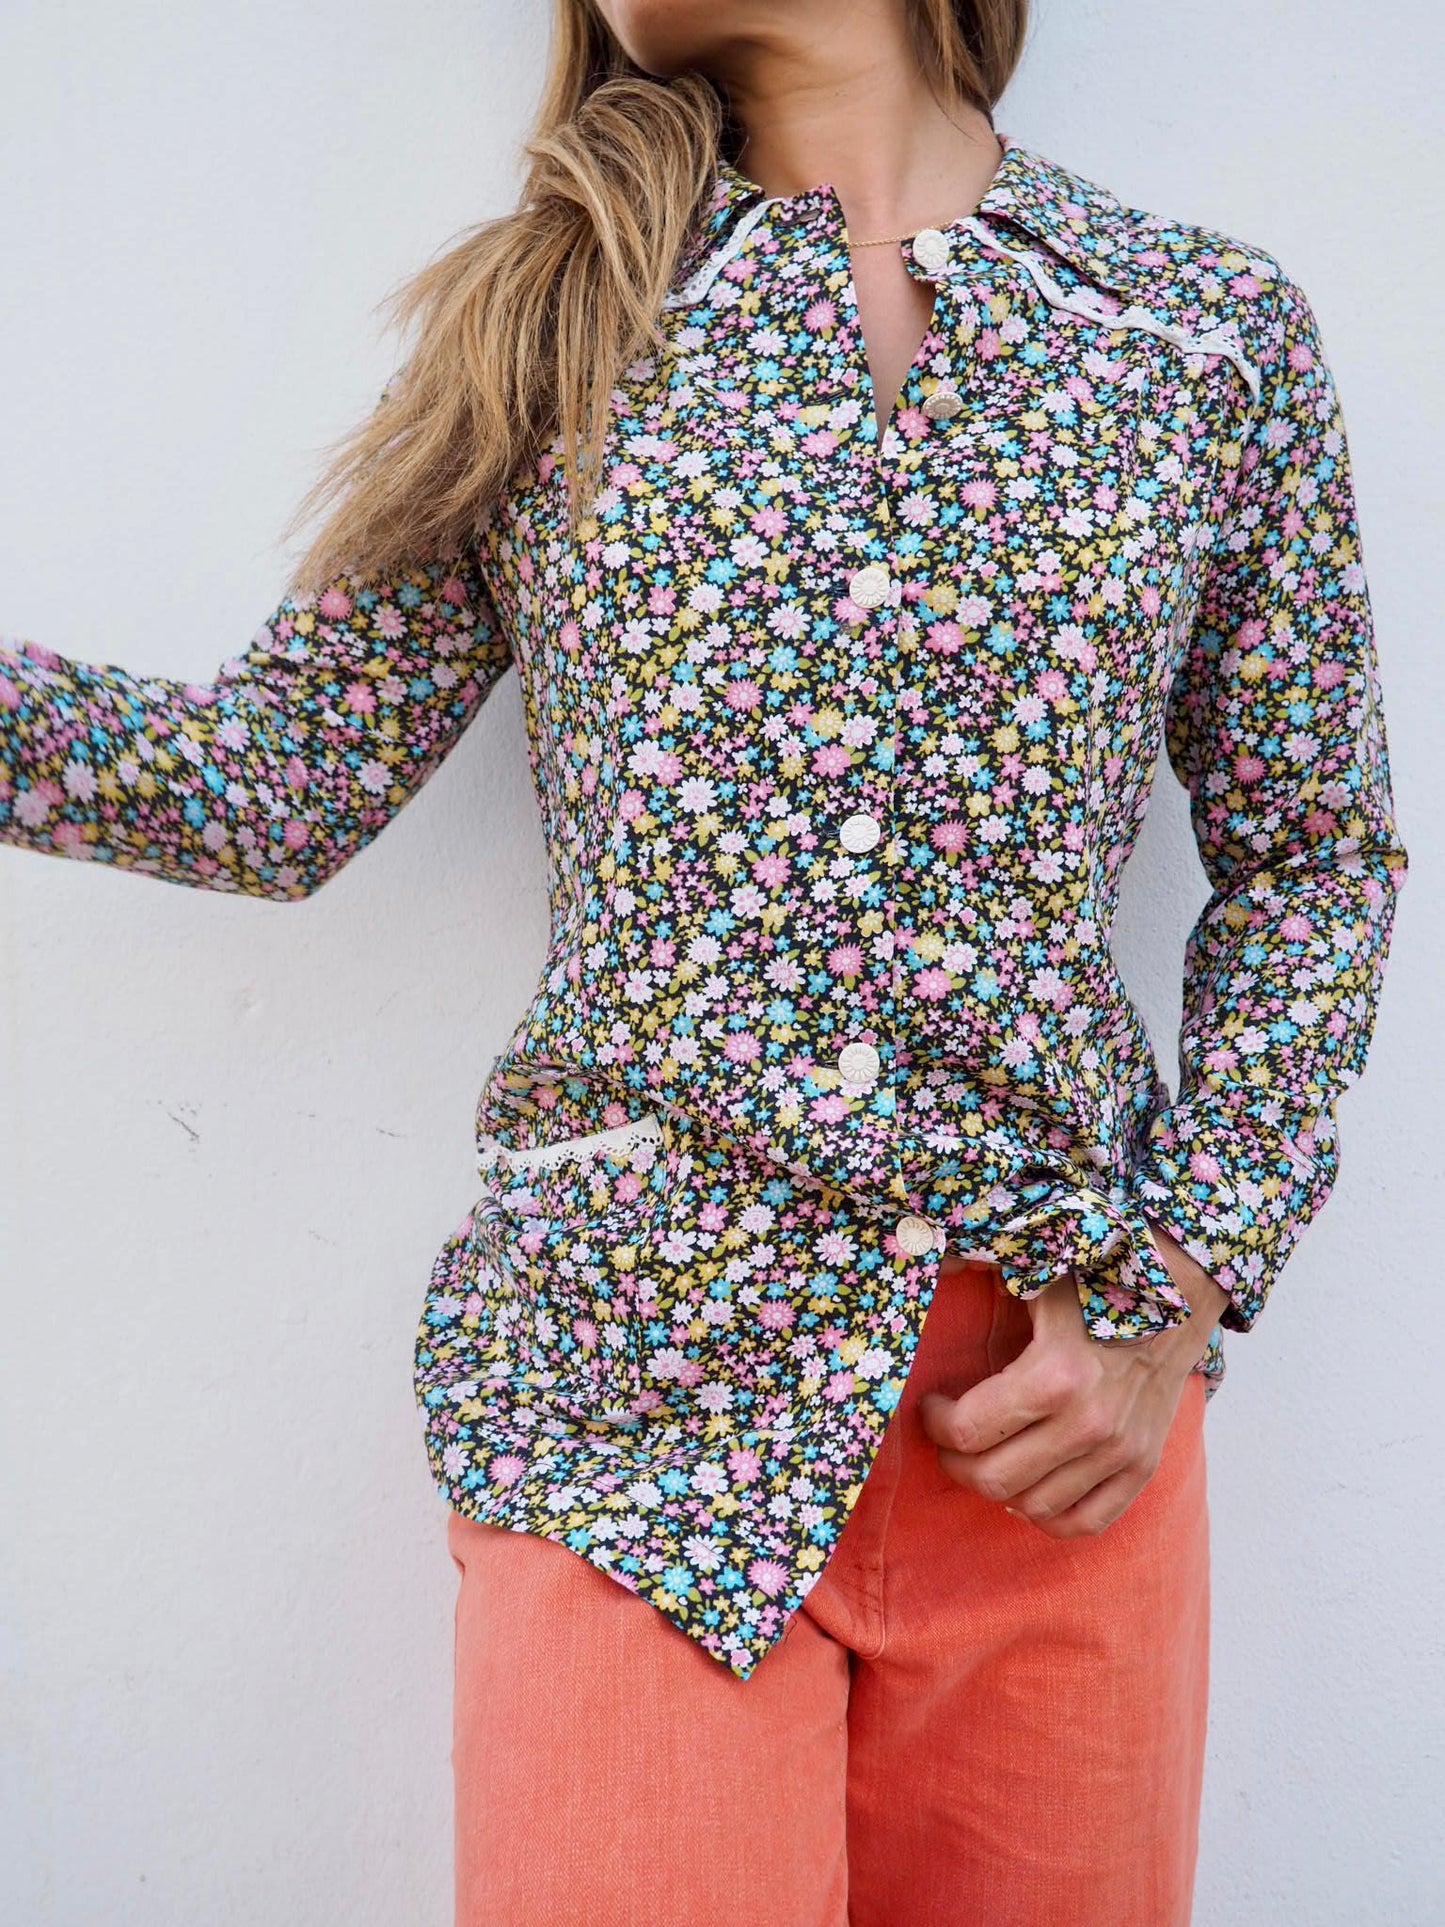 Vintage 1970’s pink and blue ditsy floral cotton long shirt with cool collars and pocket details